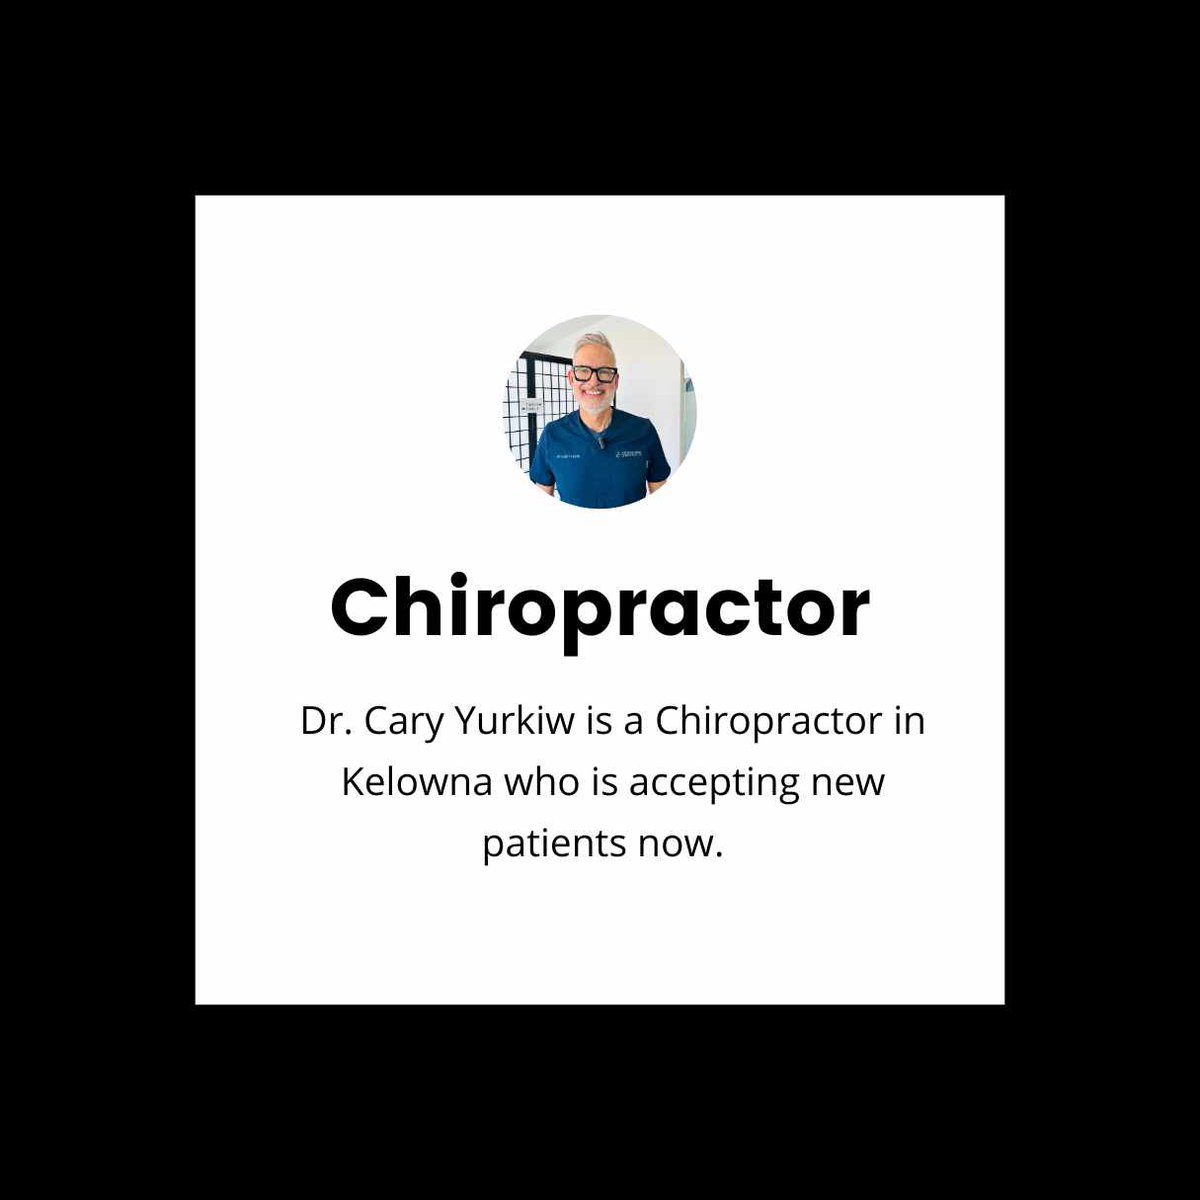 📢 New Patients Welcome! 📢

Are you looking for a trusted chiropractor in Kelowna? 

📞 Call us at 250-486-0062
💻 Visit us at tuttstreetfamilychiropractic.com

#ChiropracticCare #KelownaChiropractor #NewPatientsWelcome #NeckPainRelief #BackPainRelief #HealthAndWellness #Chiropractor